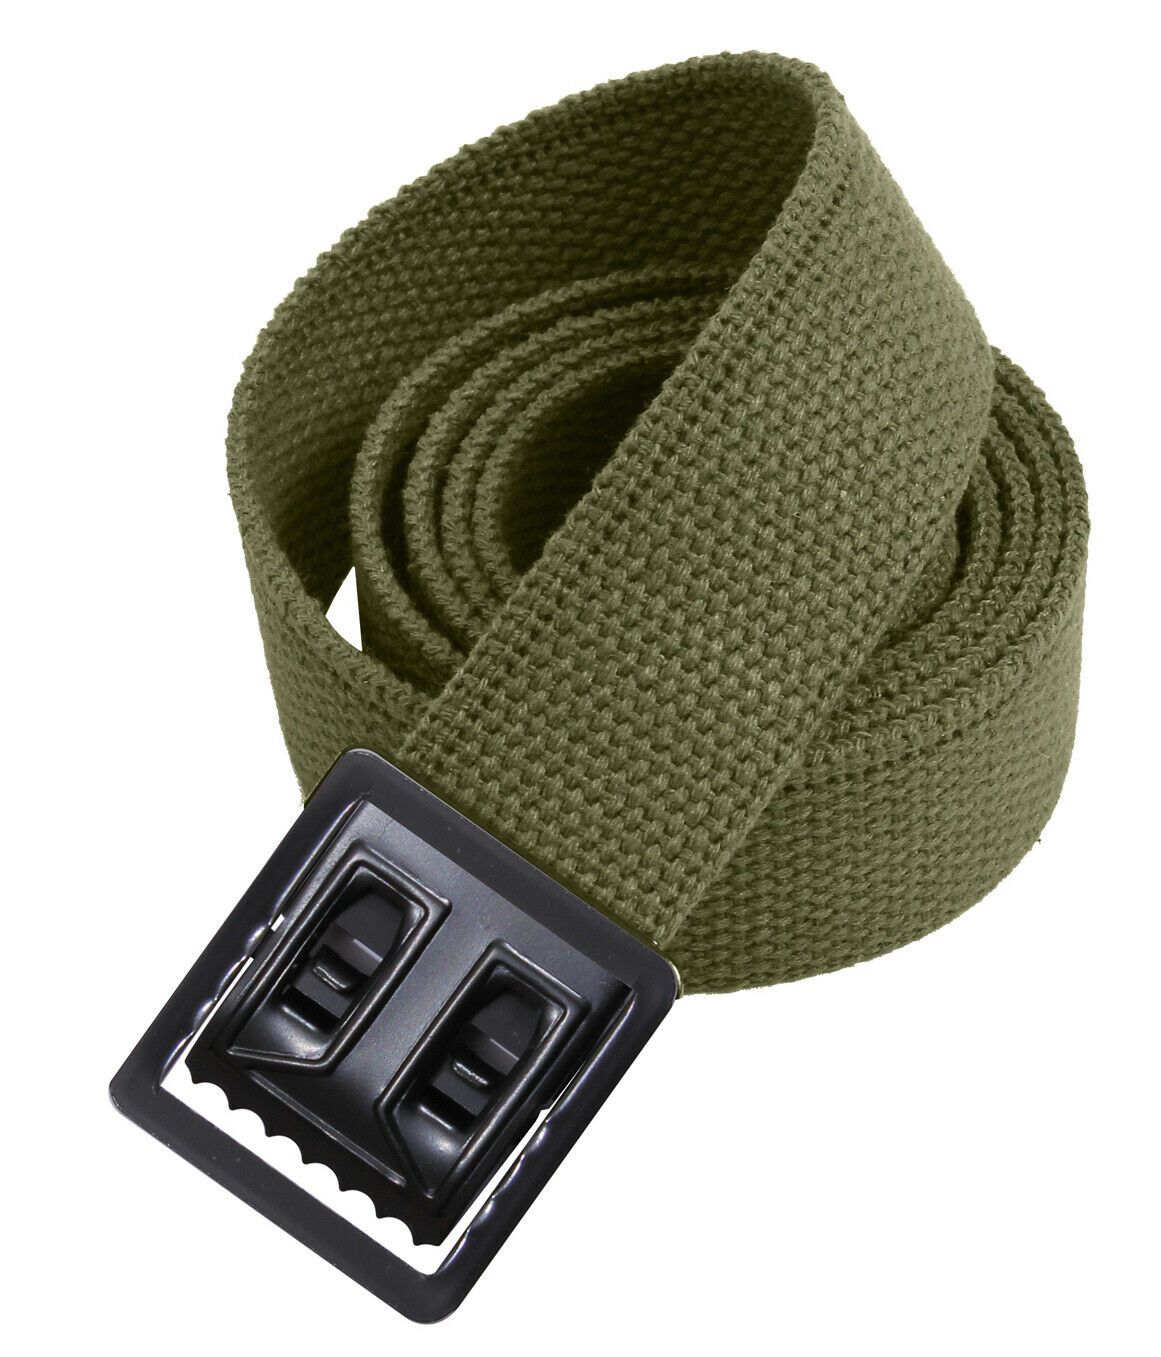 Rothco Military Web Belts With Open Face Buckle Black Coyote Olive Khaki Belt